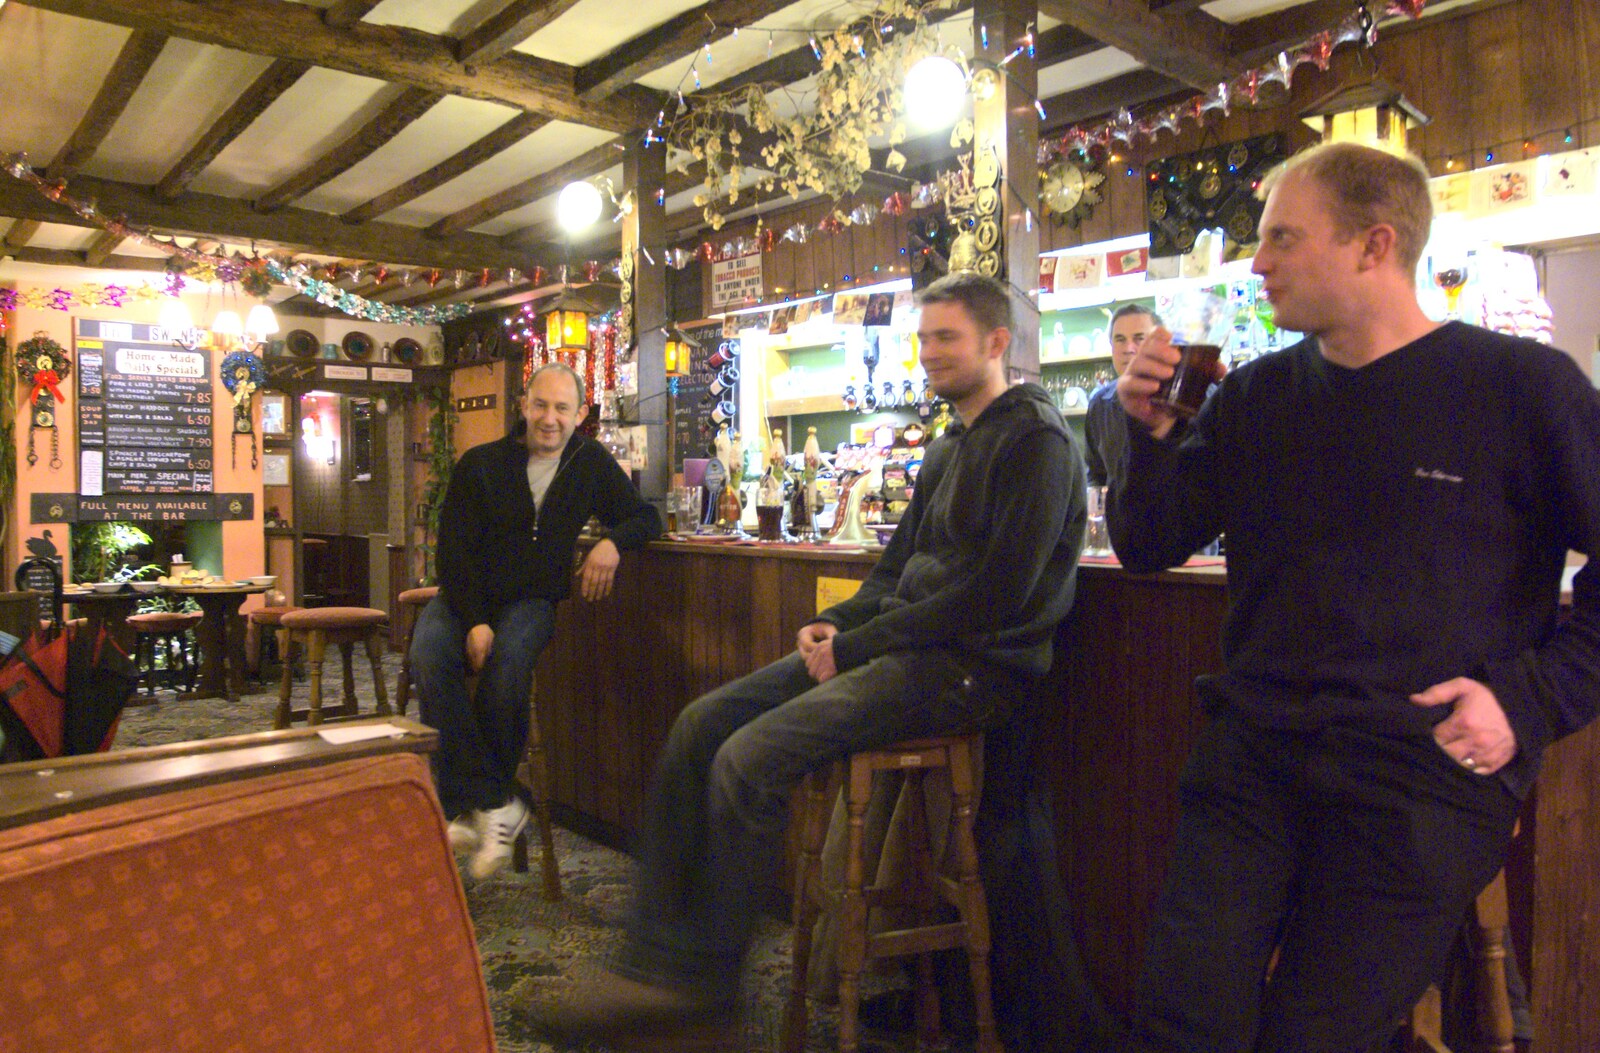 DH, Phil and Paul at the bar from New Year's Eve at the Swan Inn, and Moonlight Photos, Brome, Suffolk - 31st December 2009